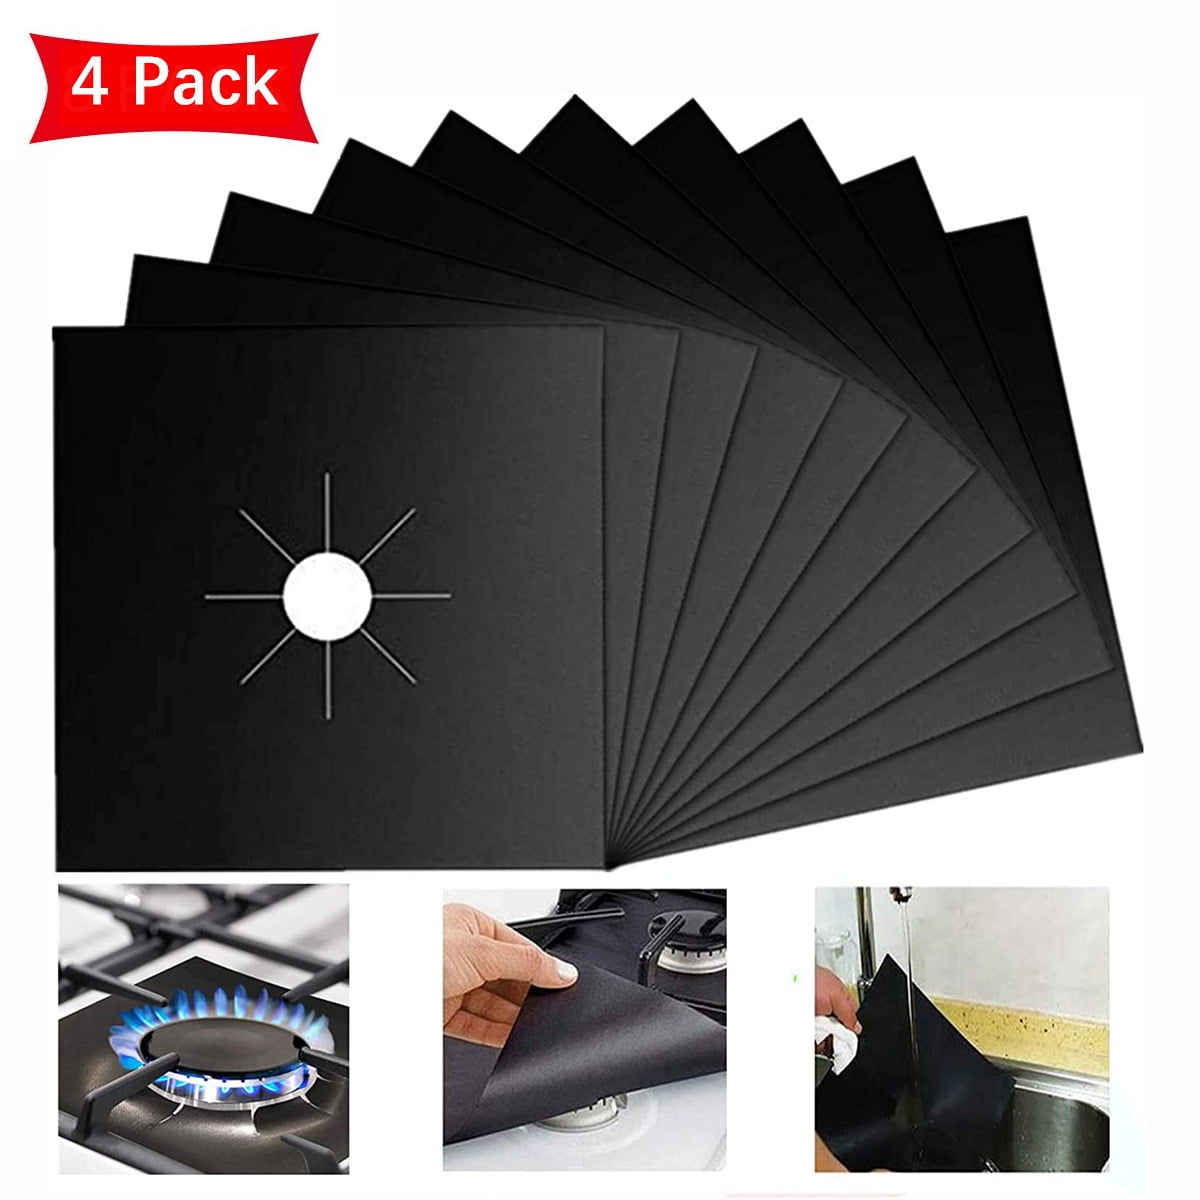 Stove Burner Covers Non-Stick 8 Packs Fast Clean Liners for Kitchen/Cooking Gas Stove Protectors Black 0.2mm Double Thickness Size 10.6 x 10.6 FDA Approved & BPA FREE Reusable 